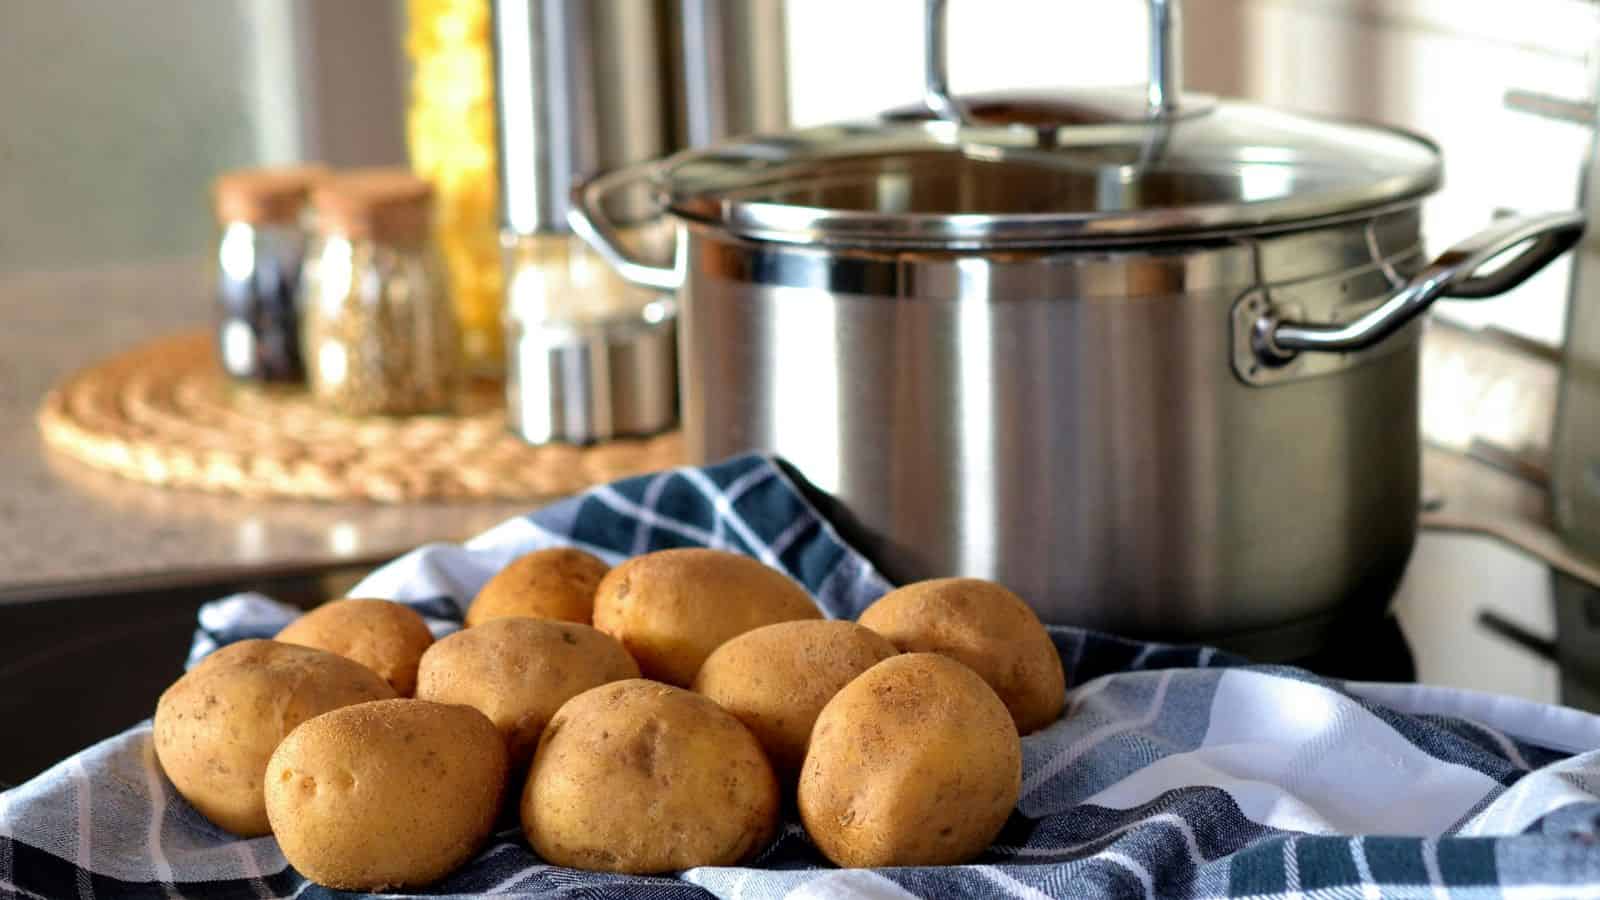 Potatoes Beside Stainless Steel Cooking Pot.